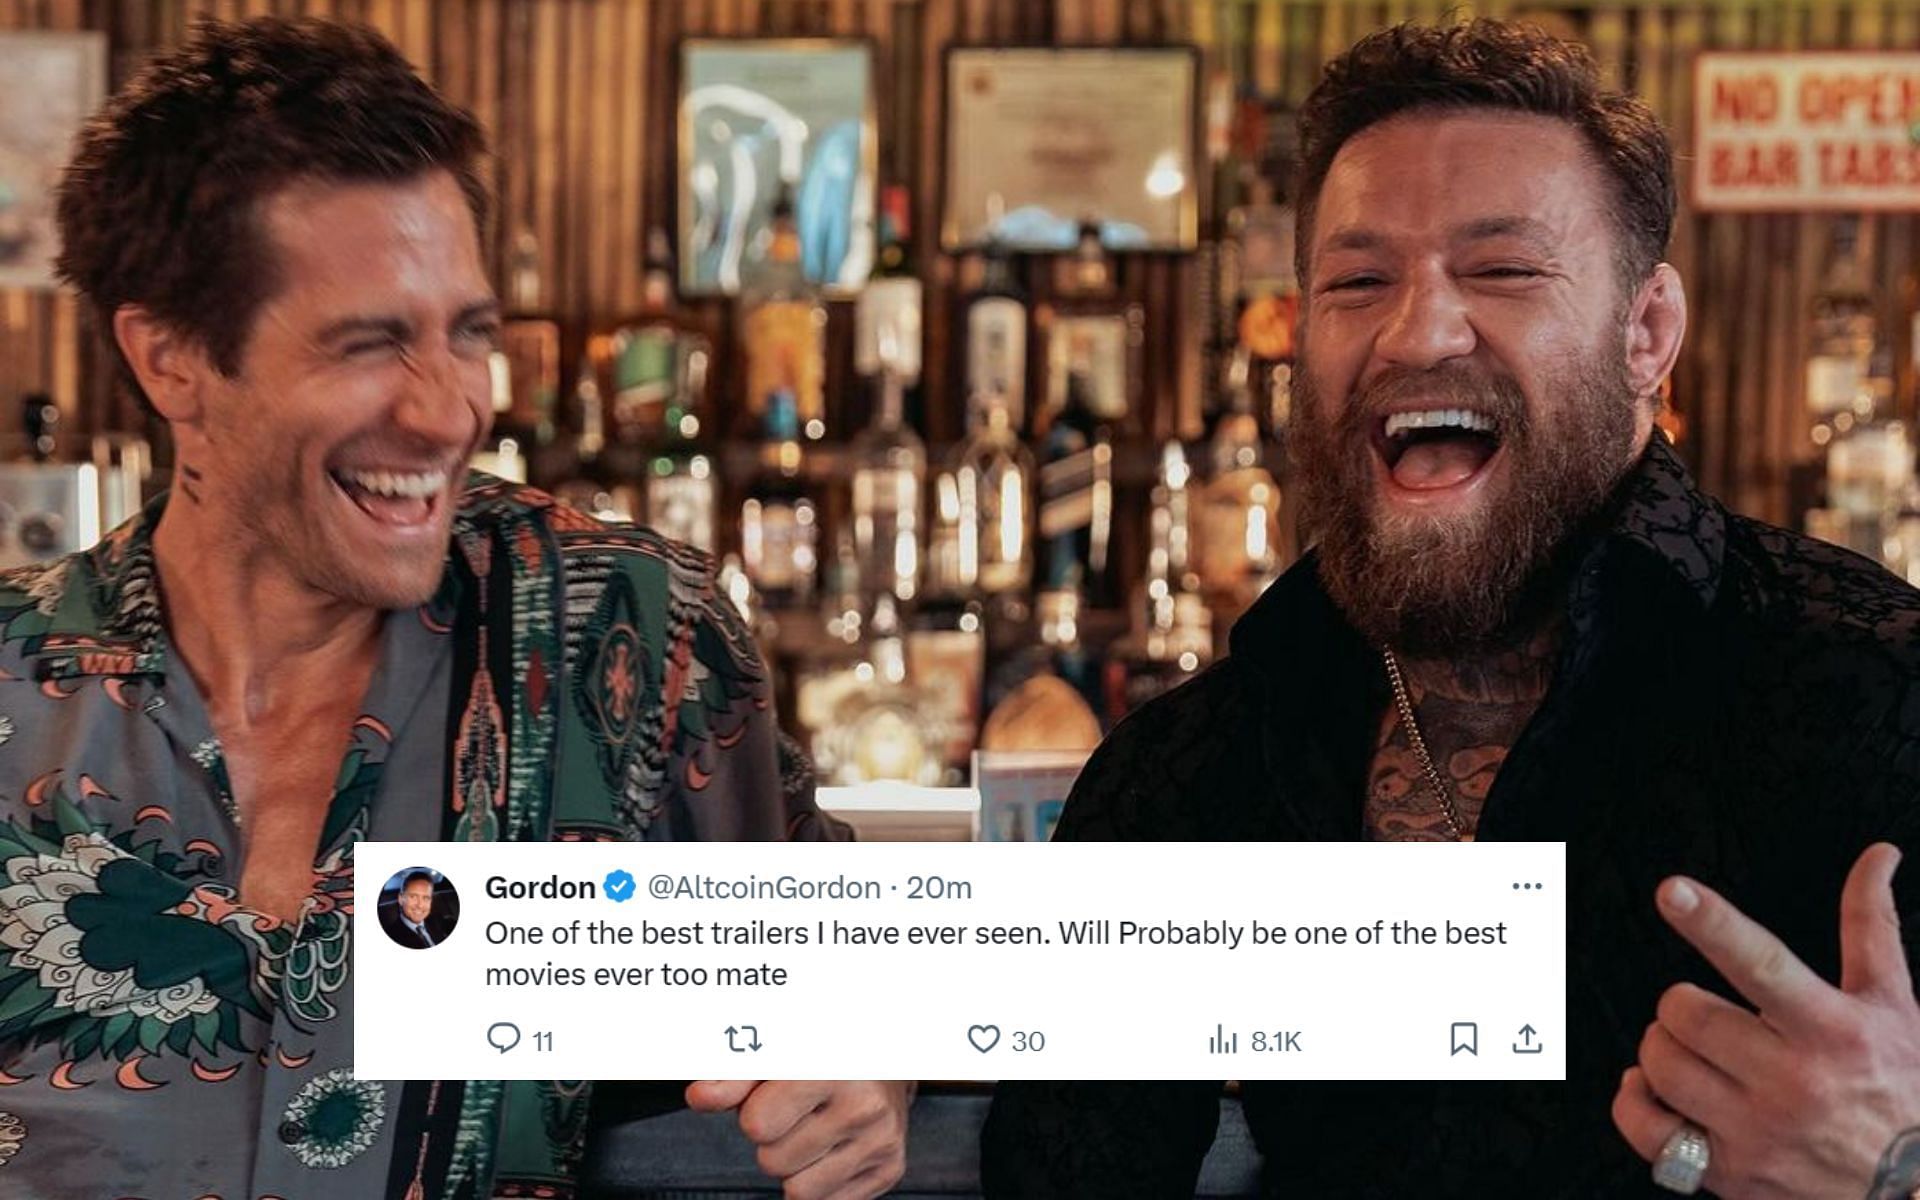 Jake Gyllenhaal (left) with Conor McGregor (right) at a pub [Images courtesy: @thenotoriousmma on Instagram]